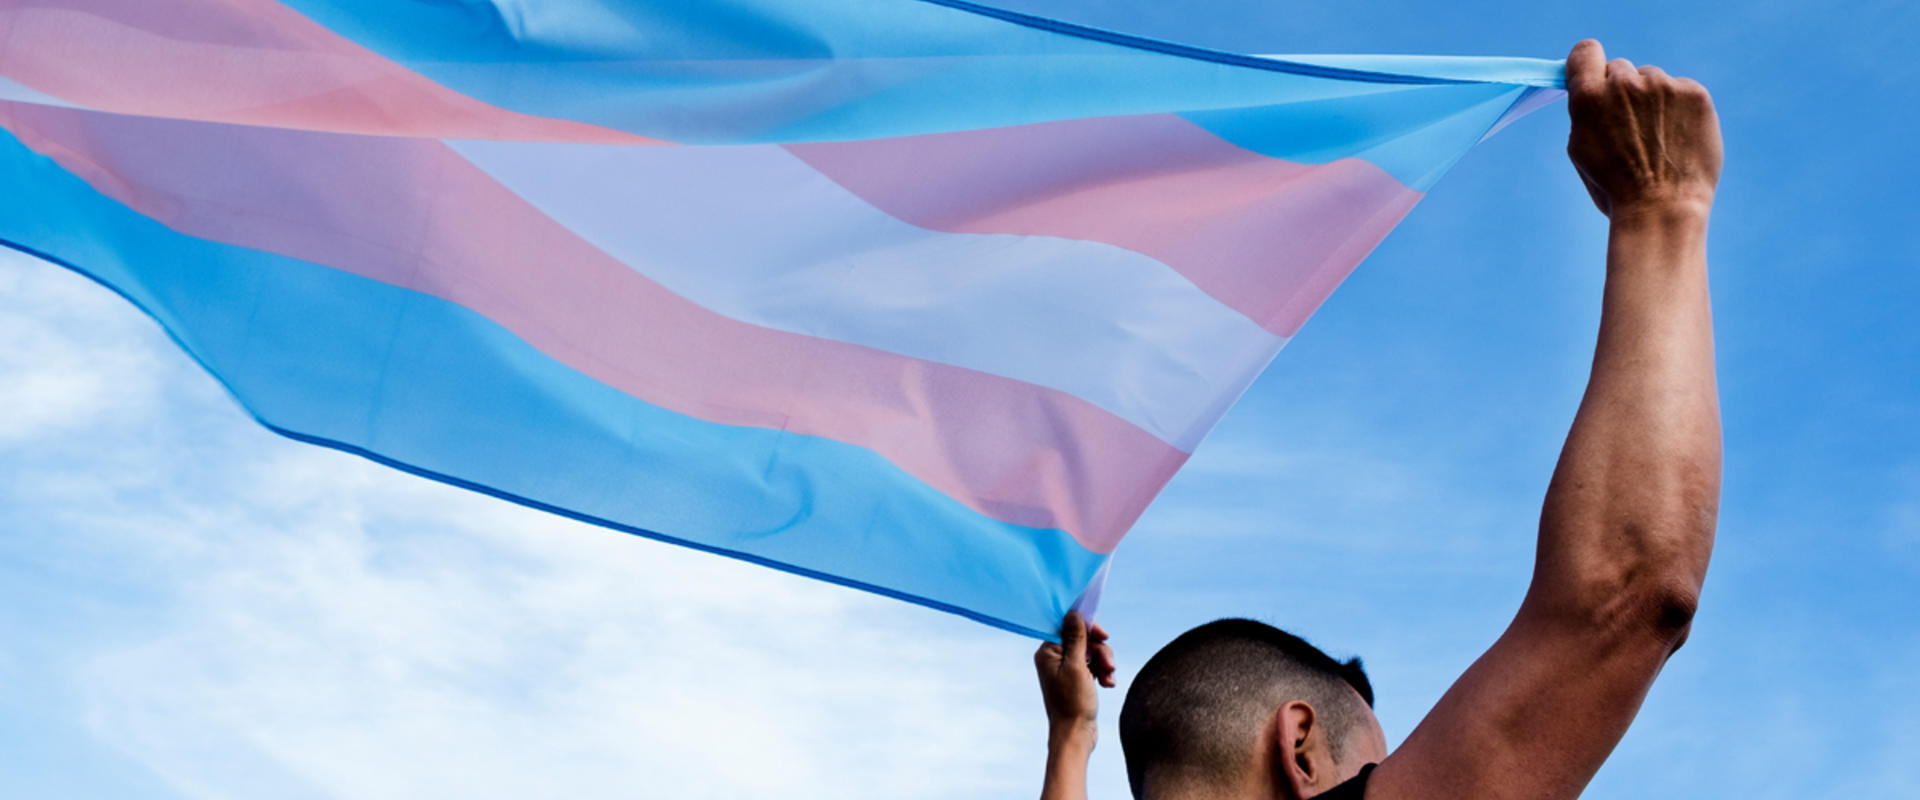 Man holding a pink, blue and white flag